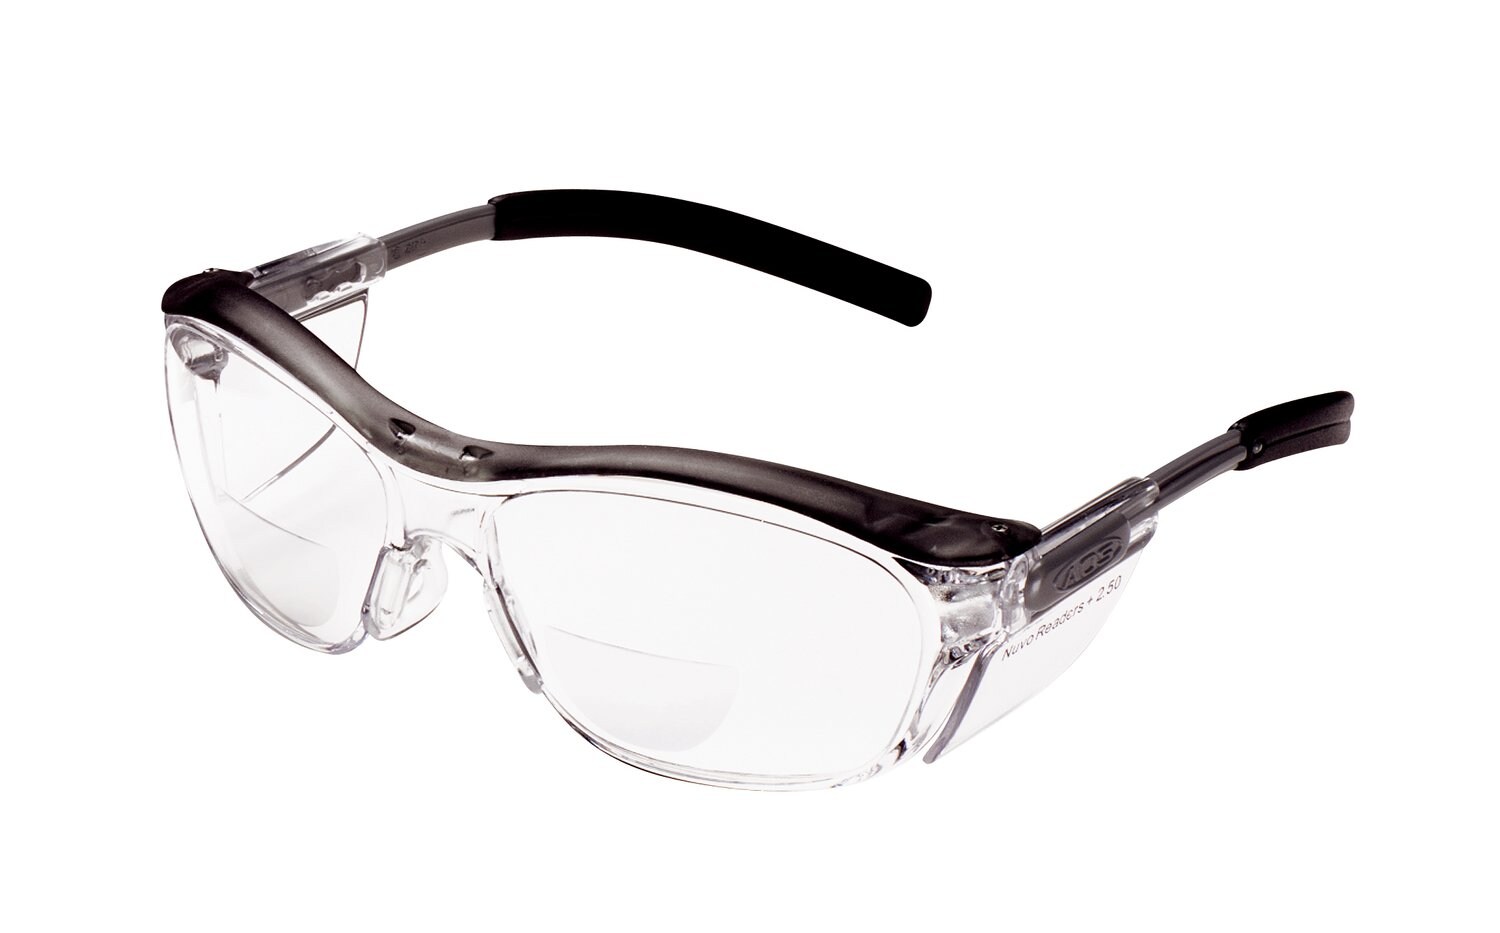 7000052799 - 3M Nuvo Protective Eyewear 11436-00000-20 Clear Lens, Grey Frame, +2.5
Diopter 20 ea/Case